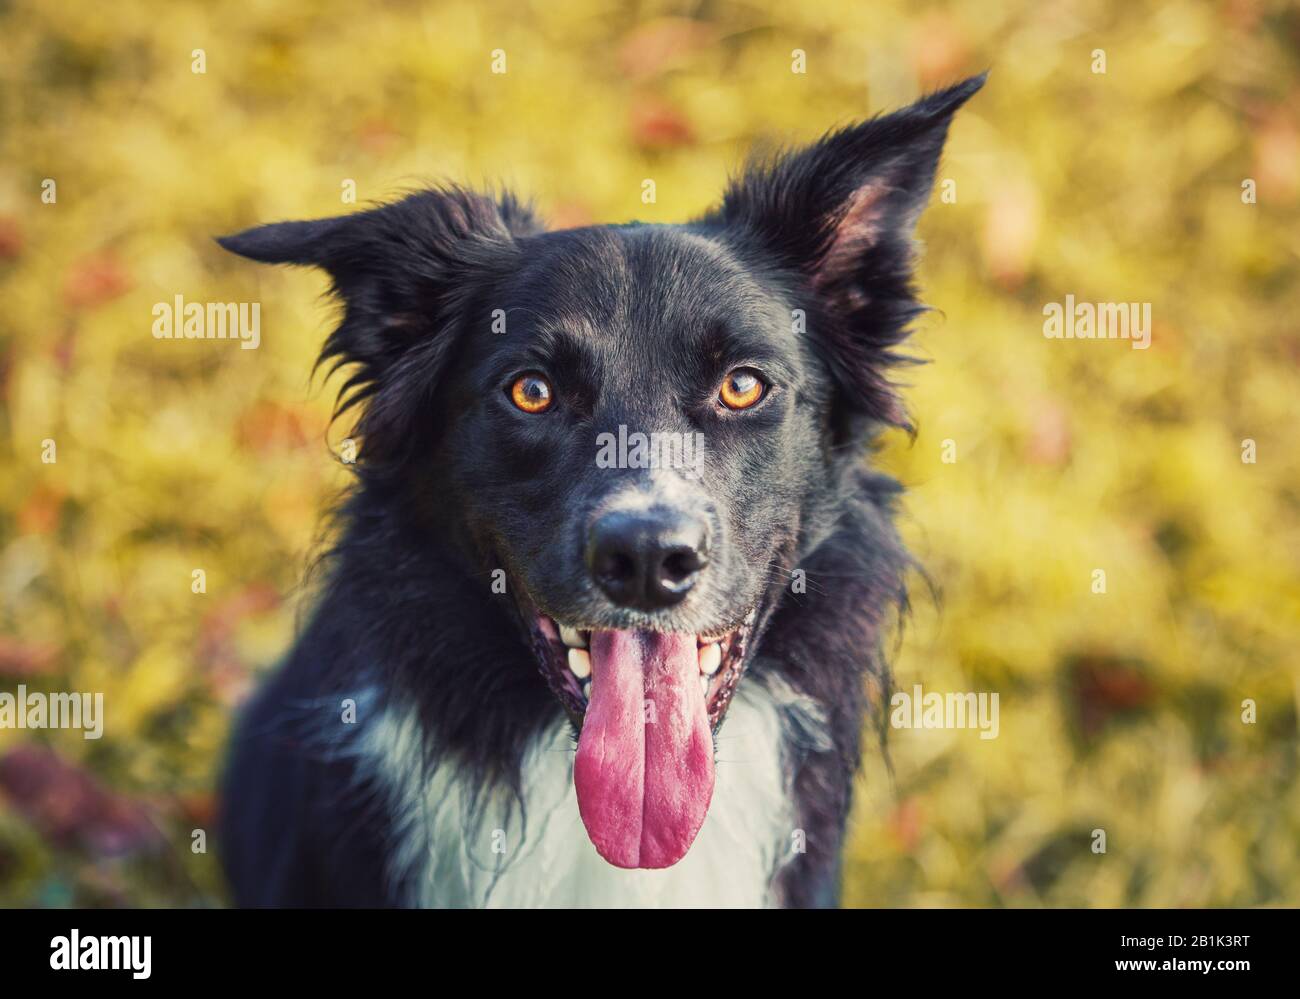 Close up portrait obedient joyful border collie dog looking up to his  master, cheerful funny face mouth open showing long tongue. Outdoors  background Stock Photo - Alamy